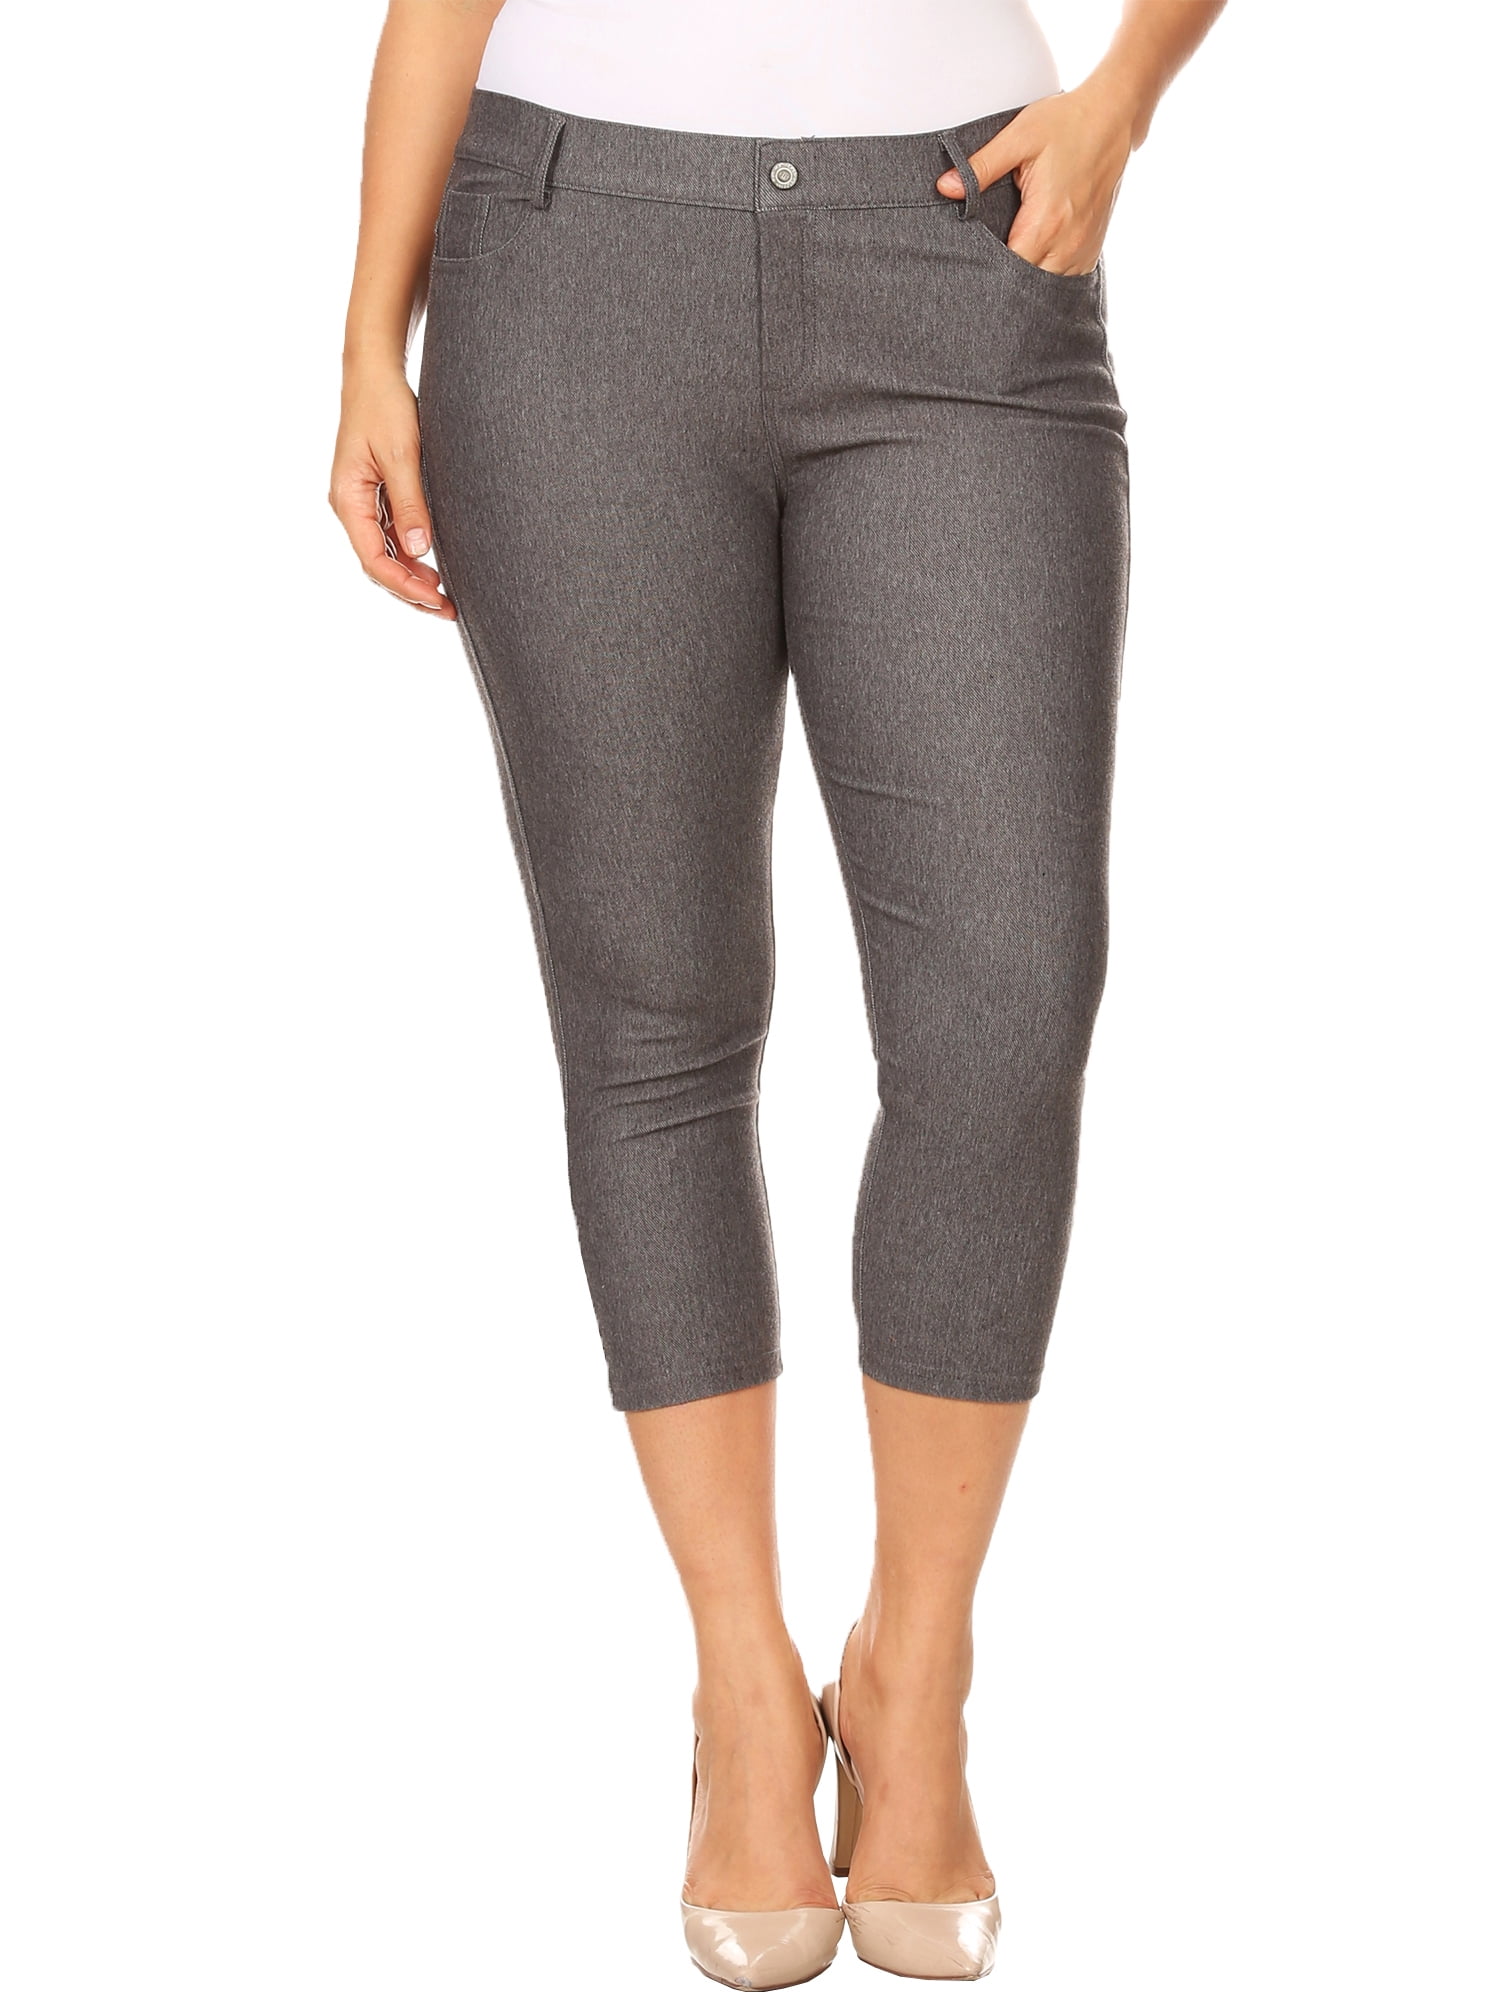 Buttery Smooth Solid Basic Extra Plus Size Capris - 3X-5X - New Mix